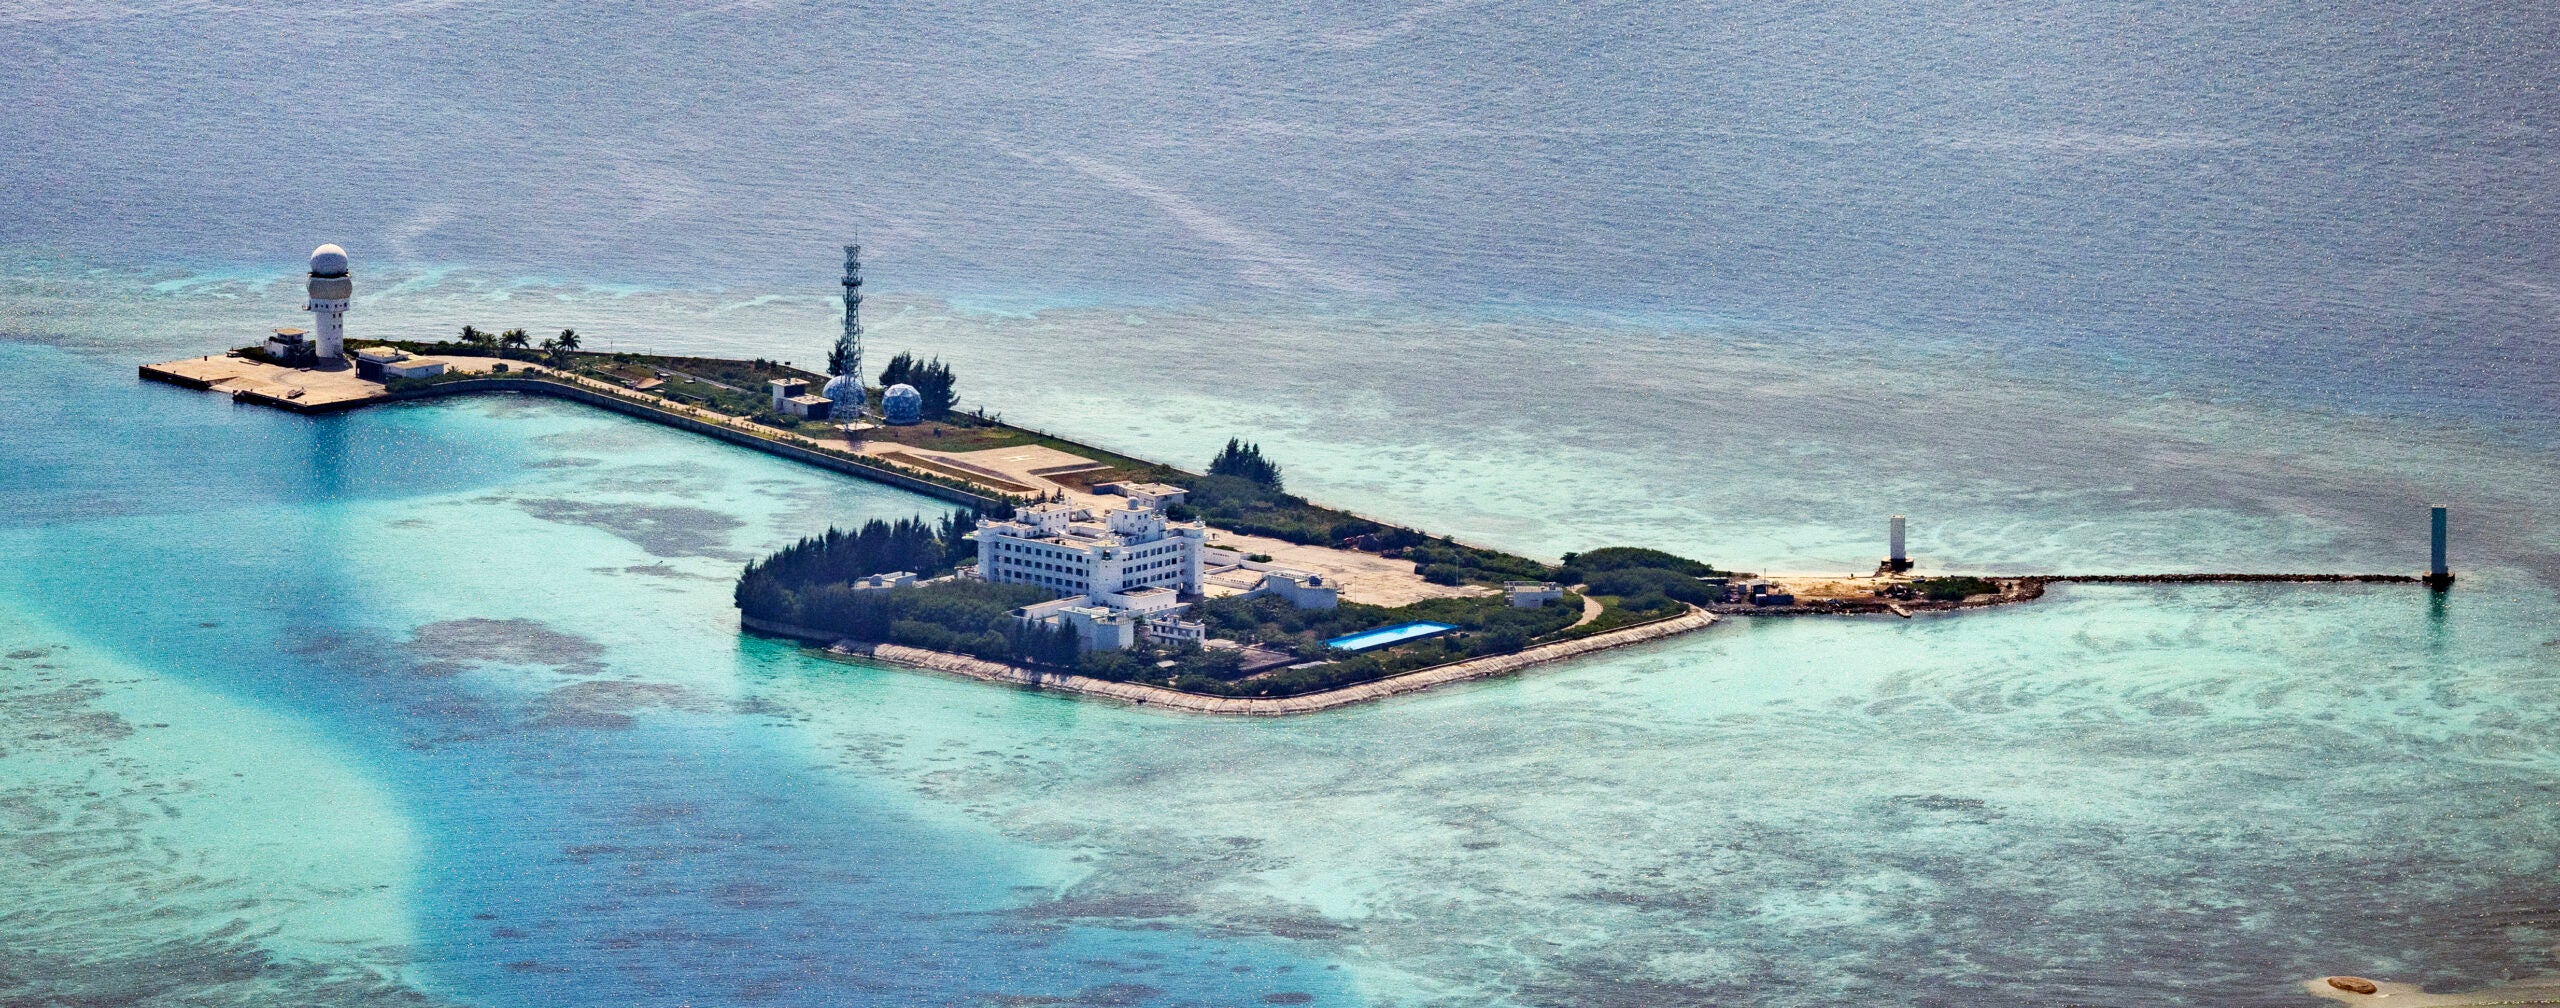 SPRATLY ISLANDS, AT SEA - OCTOBER 25: Buildings and structures are seen on the artificial island built by China in Hughes Reef on October 25, 2022 in Spratly Islands, South China Sea. China has progressively asserted its claim of ownership over disputed islands in the South China Sea by artificially increasing the size of islands, creating new islands and building ports, military outposts and airstrips. The South China sea is an important trade route and is of significant interest as geopolitical tensions remain high in the region. (Photo by Ezra Acayan/Getty Images)